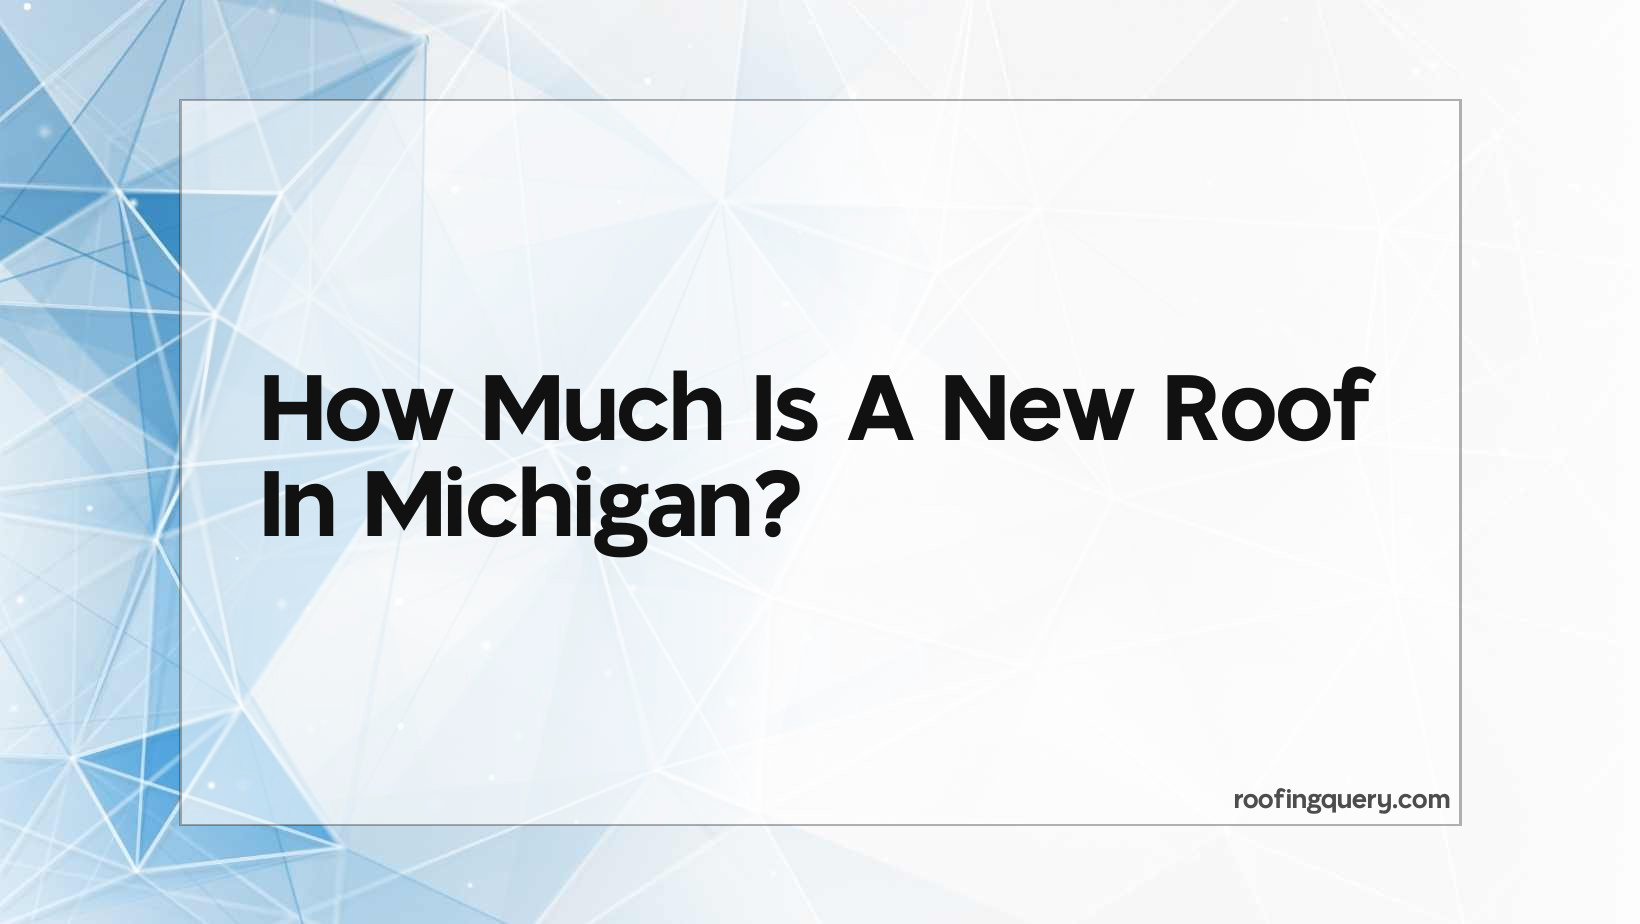 How Much Is A New Roof In Michigan?